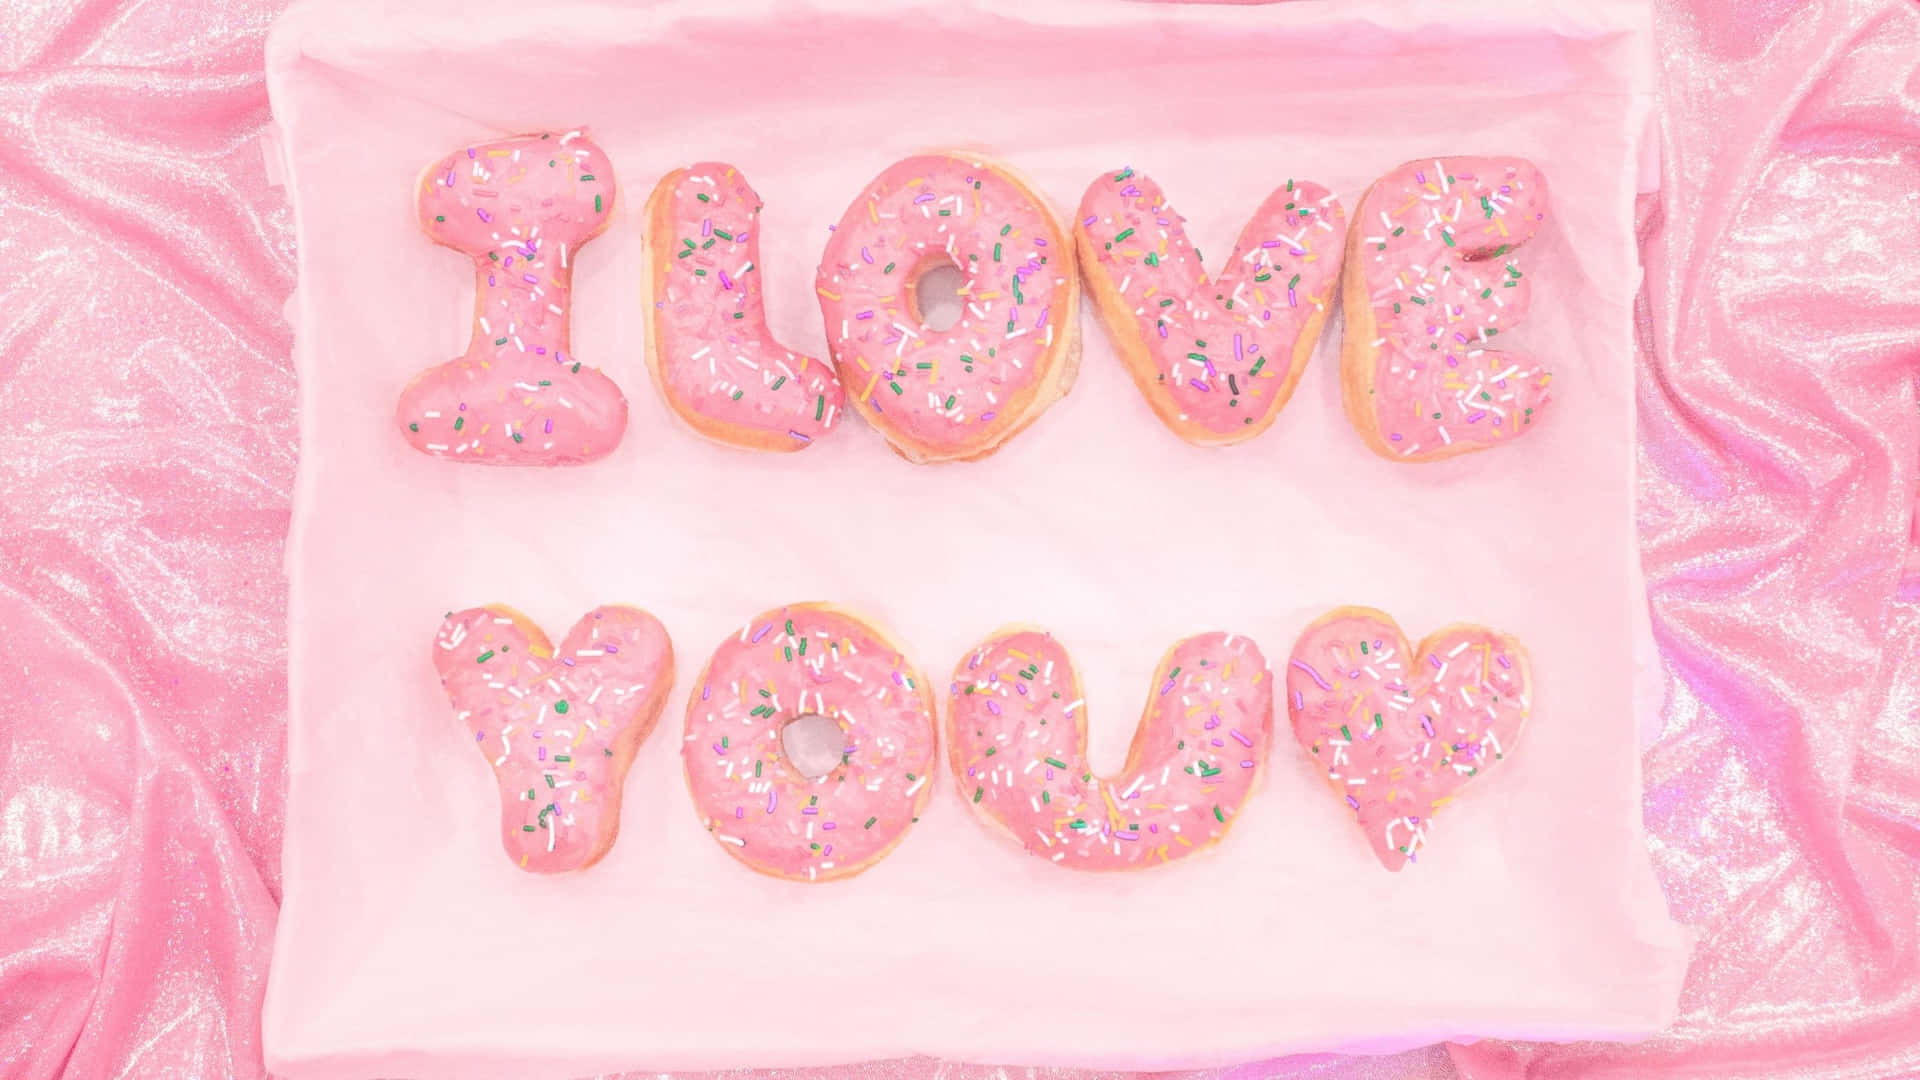 Aesthetic Computer Light Pink Donuts Wallpaper